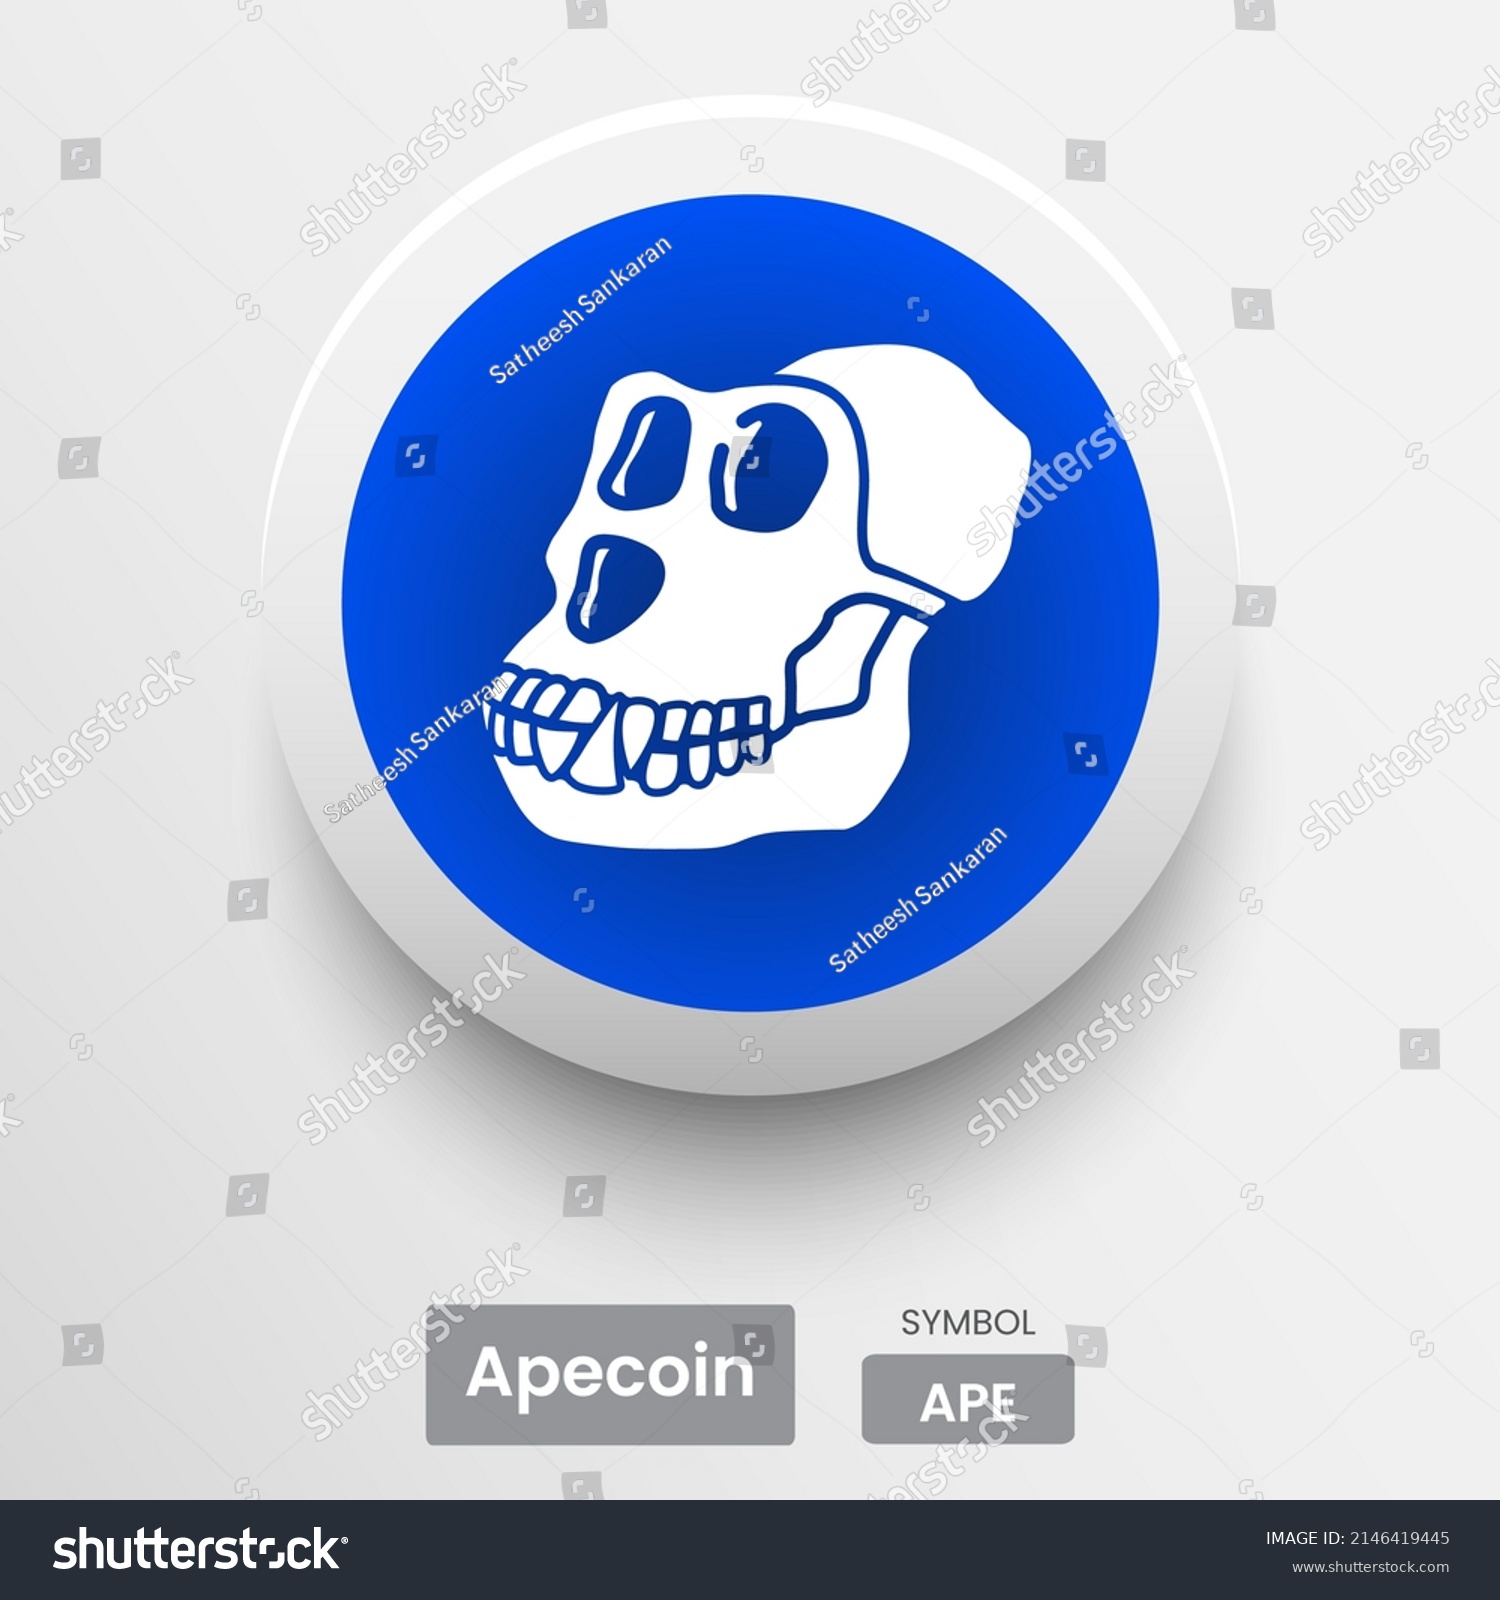 SVG of Blockchain based secure Cryptocurrency coin Apecoin (APE) icon isolated on colored background. Digital virtual money tokens. Decentralized finance technology illustration. Altcoin Vector logos. svg